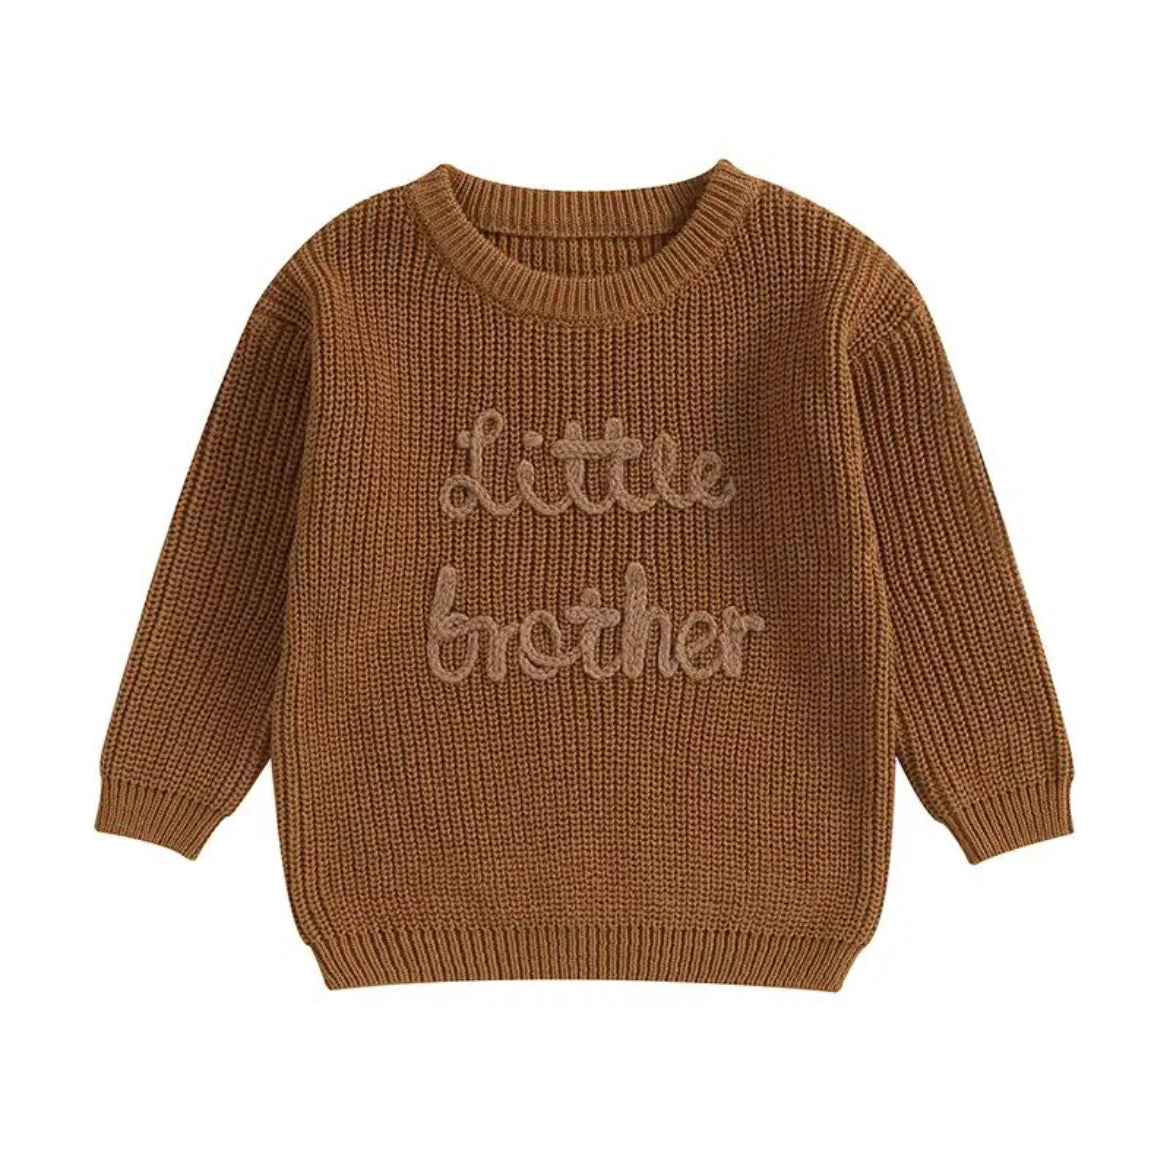 'Little Brother' Embroidered Knit Sweater